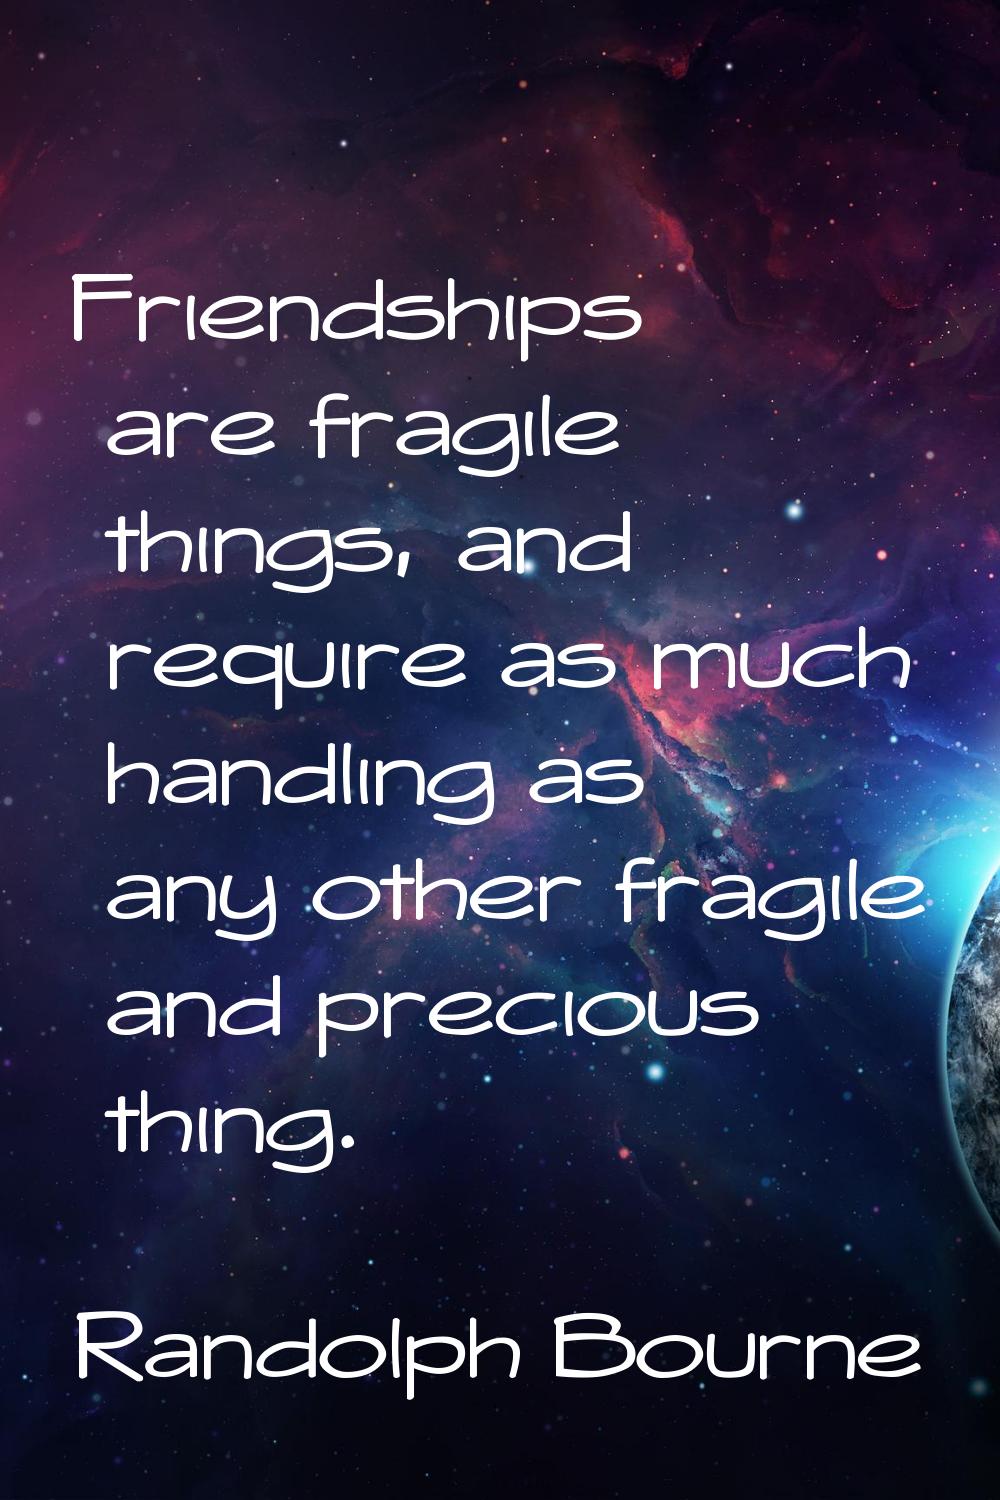 Friendships are fragile things, and require as much handling as any other fragile and precious thin